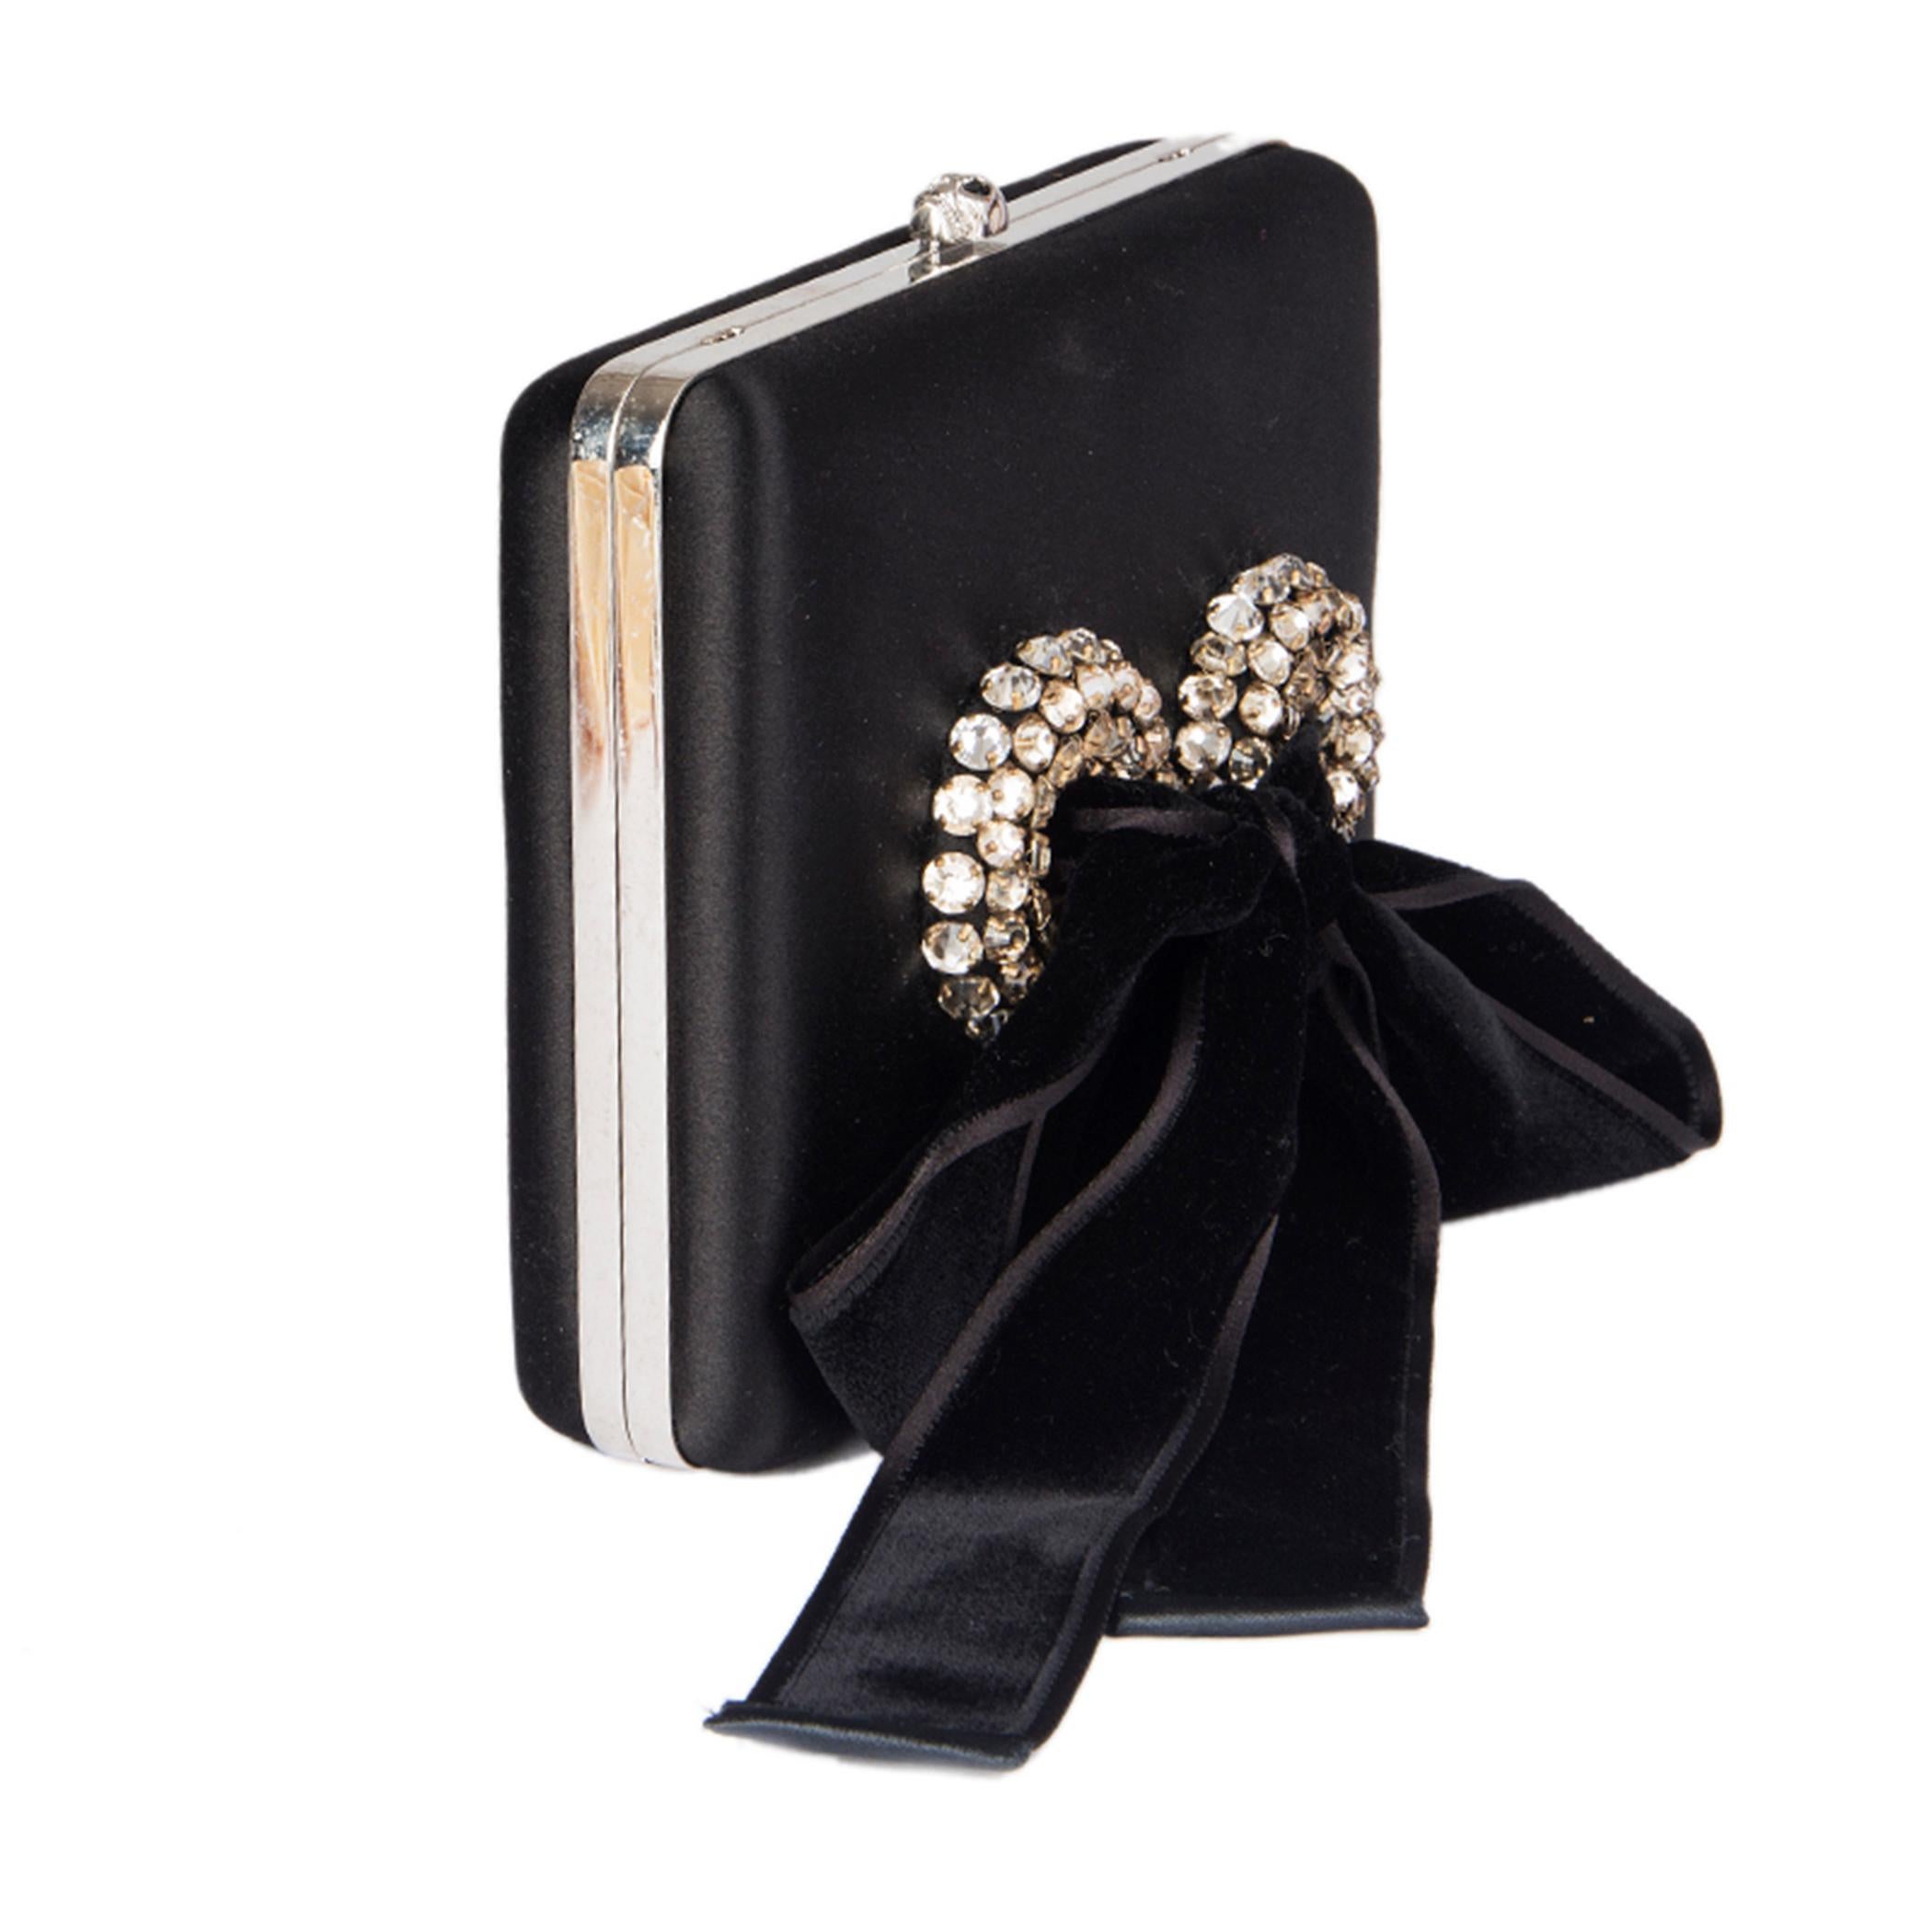 100% authentic Alexander McQueen box clutch in black satin with velvet and rhinestone ribbon on the front. Detachable chain strap in silver-tone metal. Opens with a small skull push-lock. Lined in black leather with an open pocket against the back.